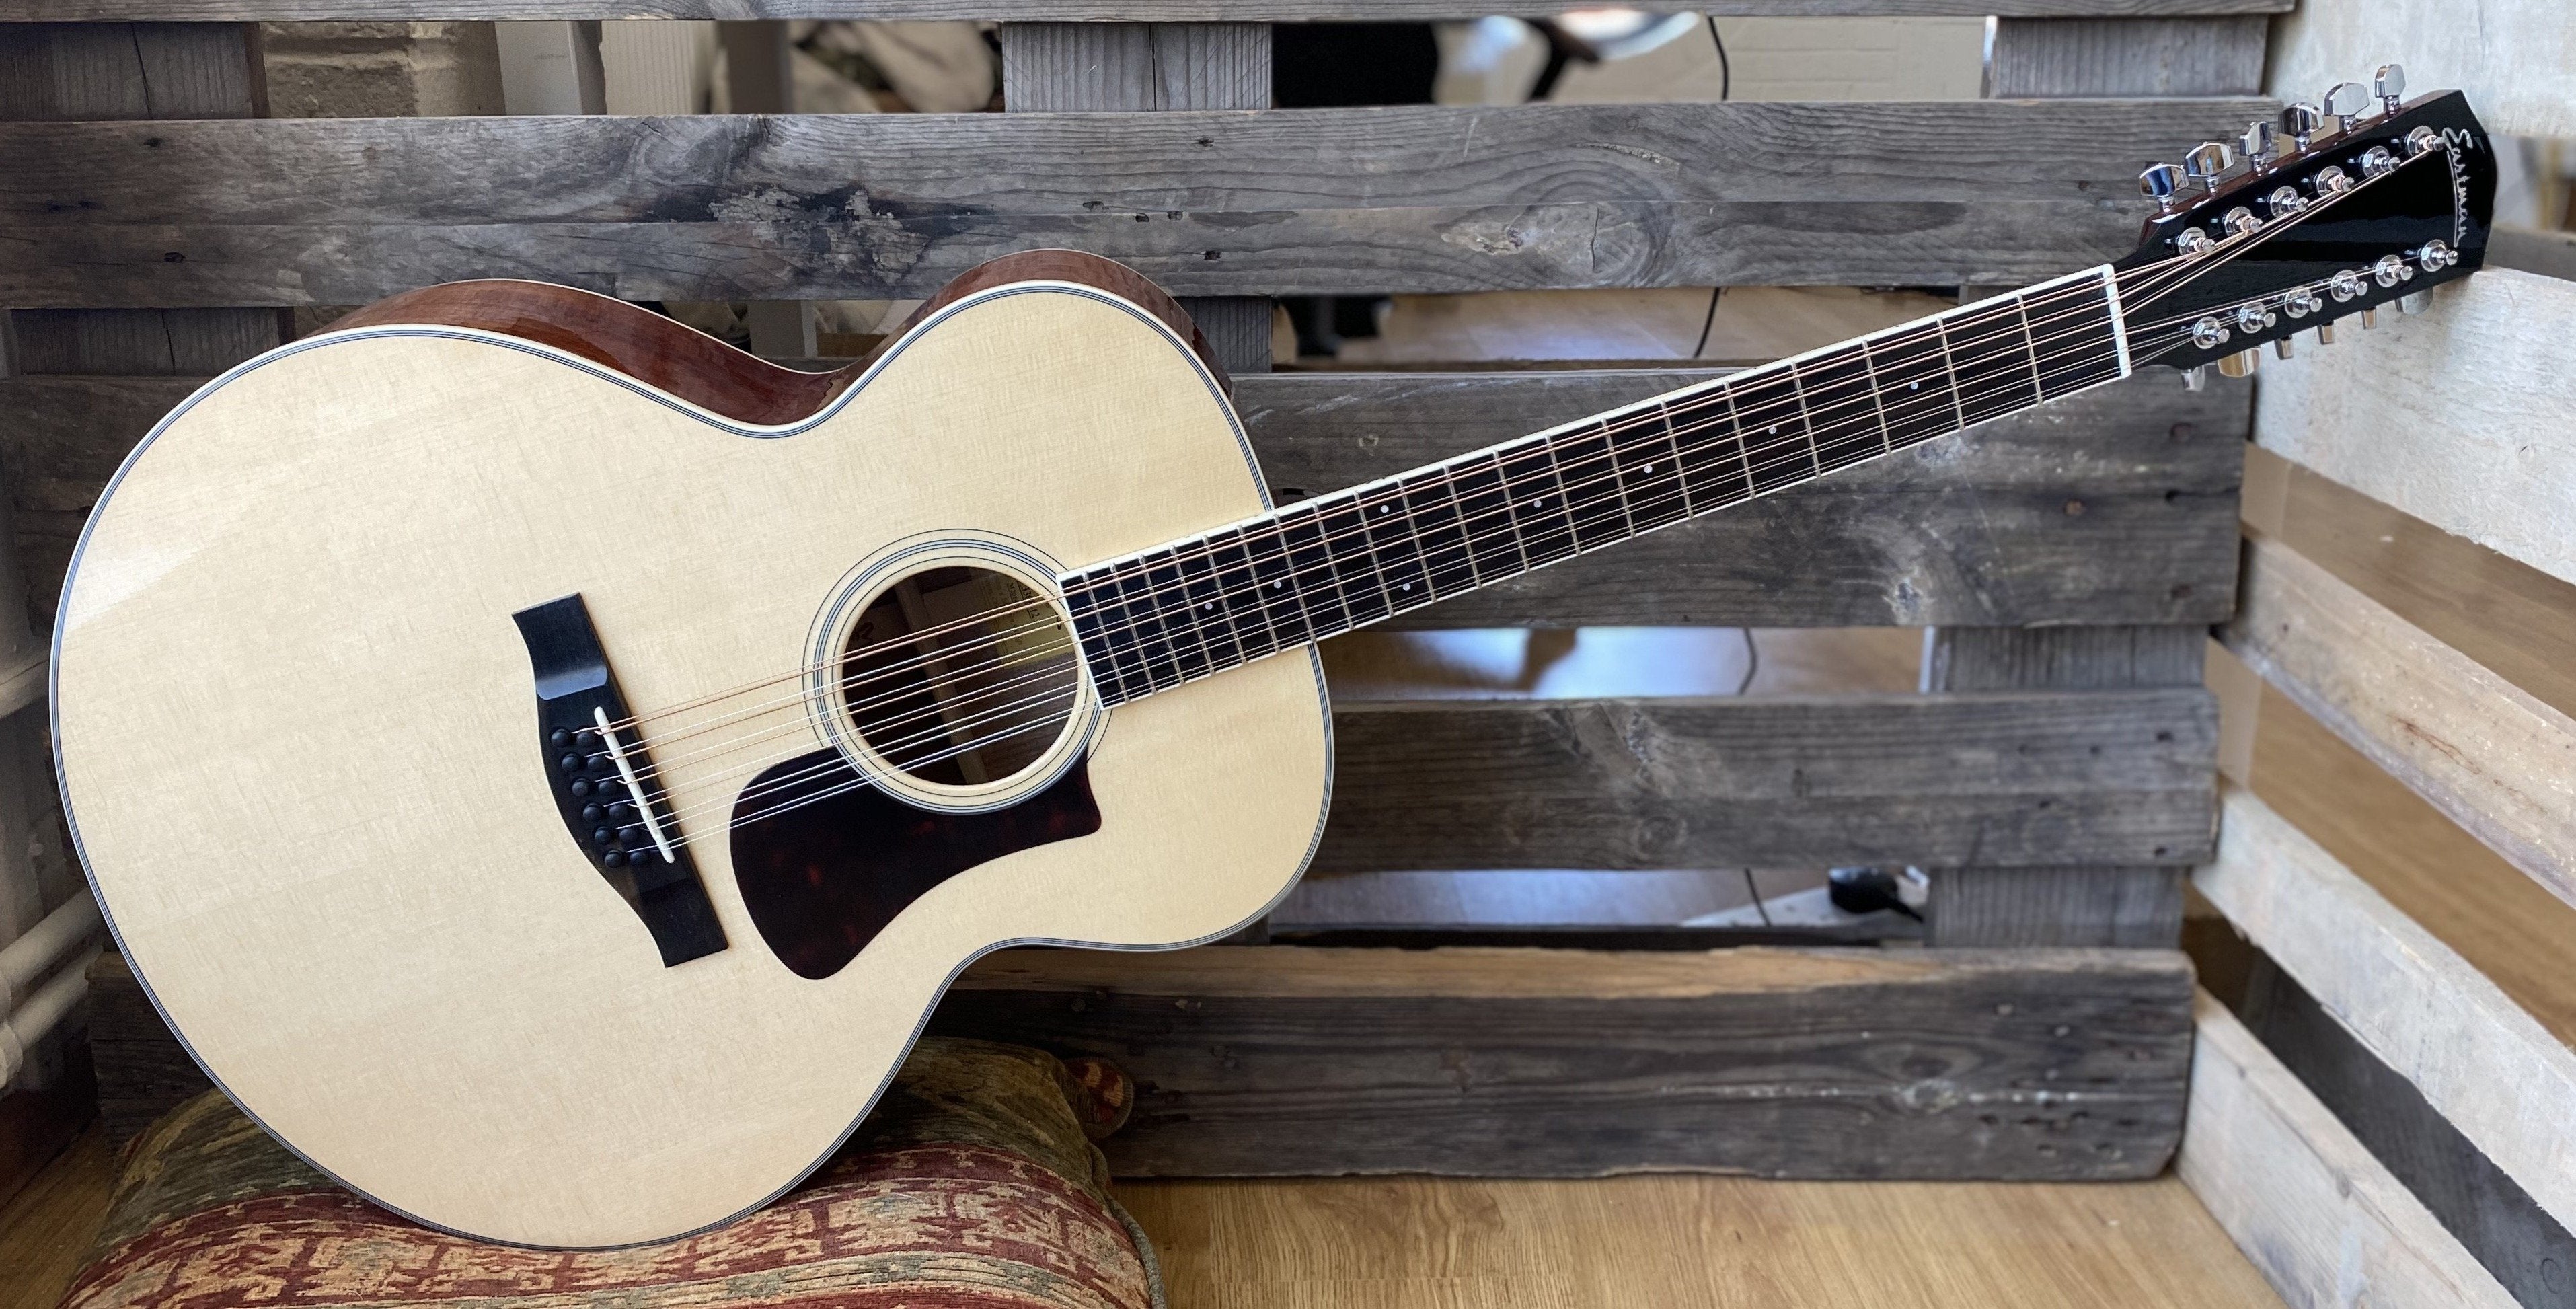 Eastman AC330-12E Jumbo 12 string, Electro Acoustic Guitar for sale at Richards Guitars.